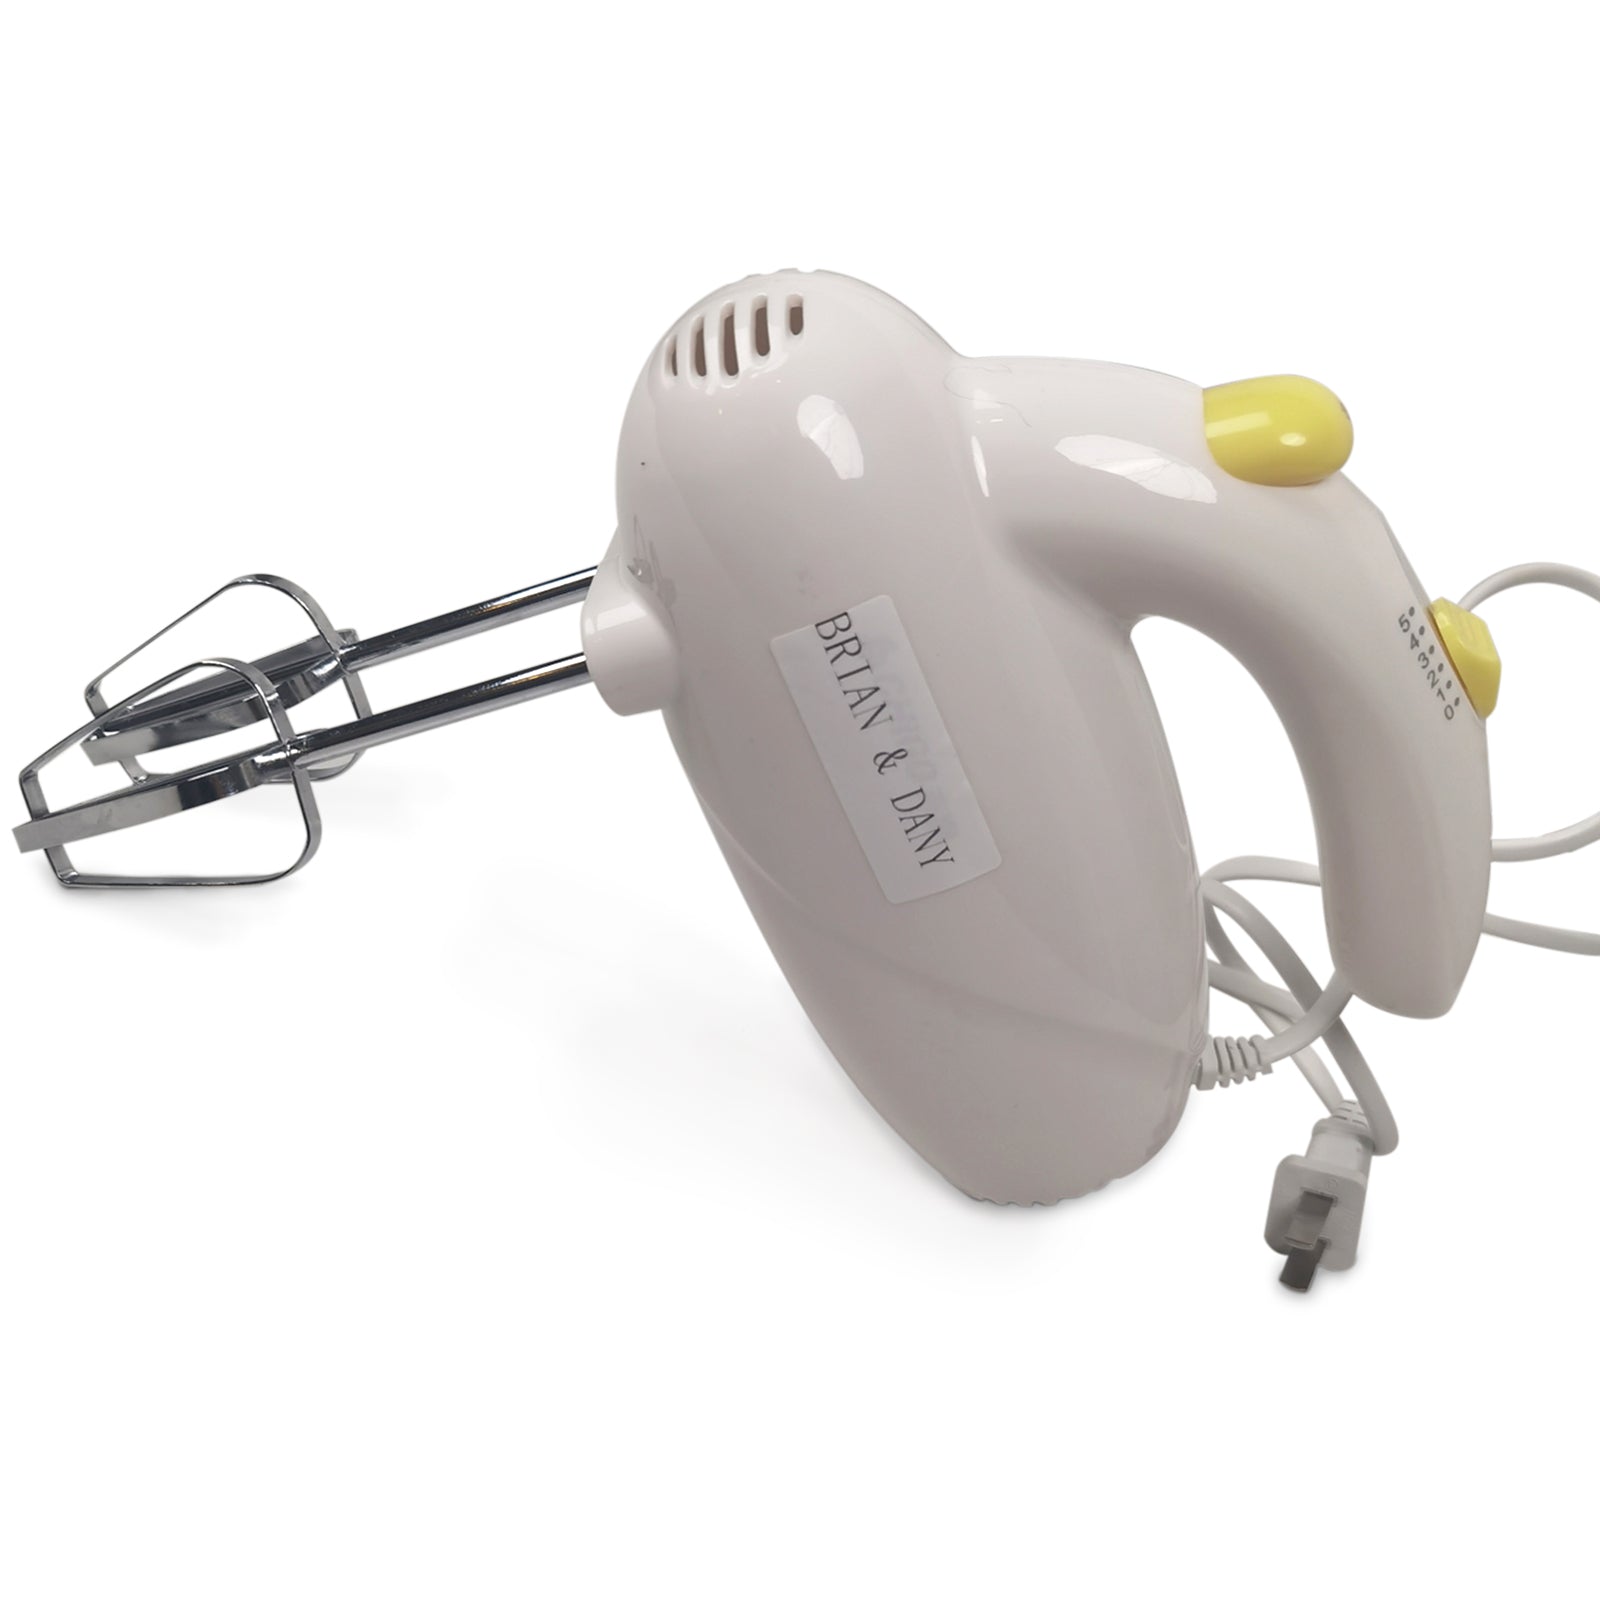 BRIAN & DANY Electric hand mixer 6-speed lightweight hand-held egg beater